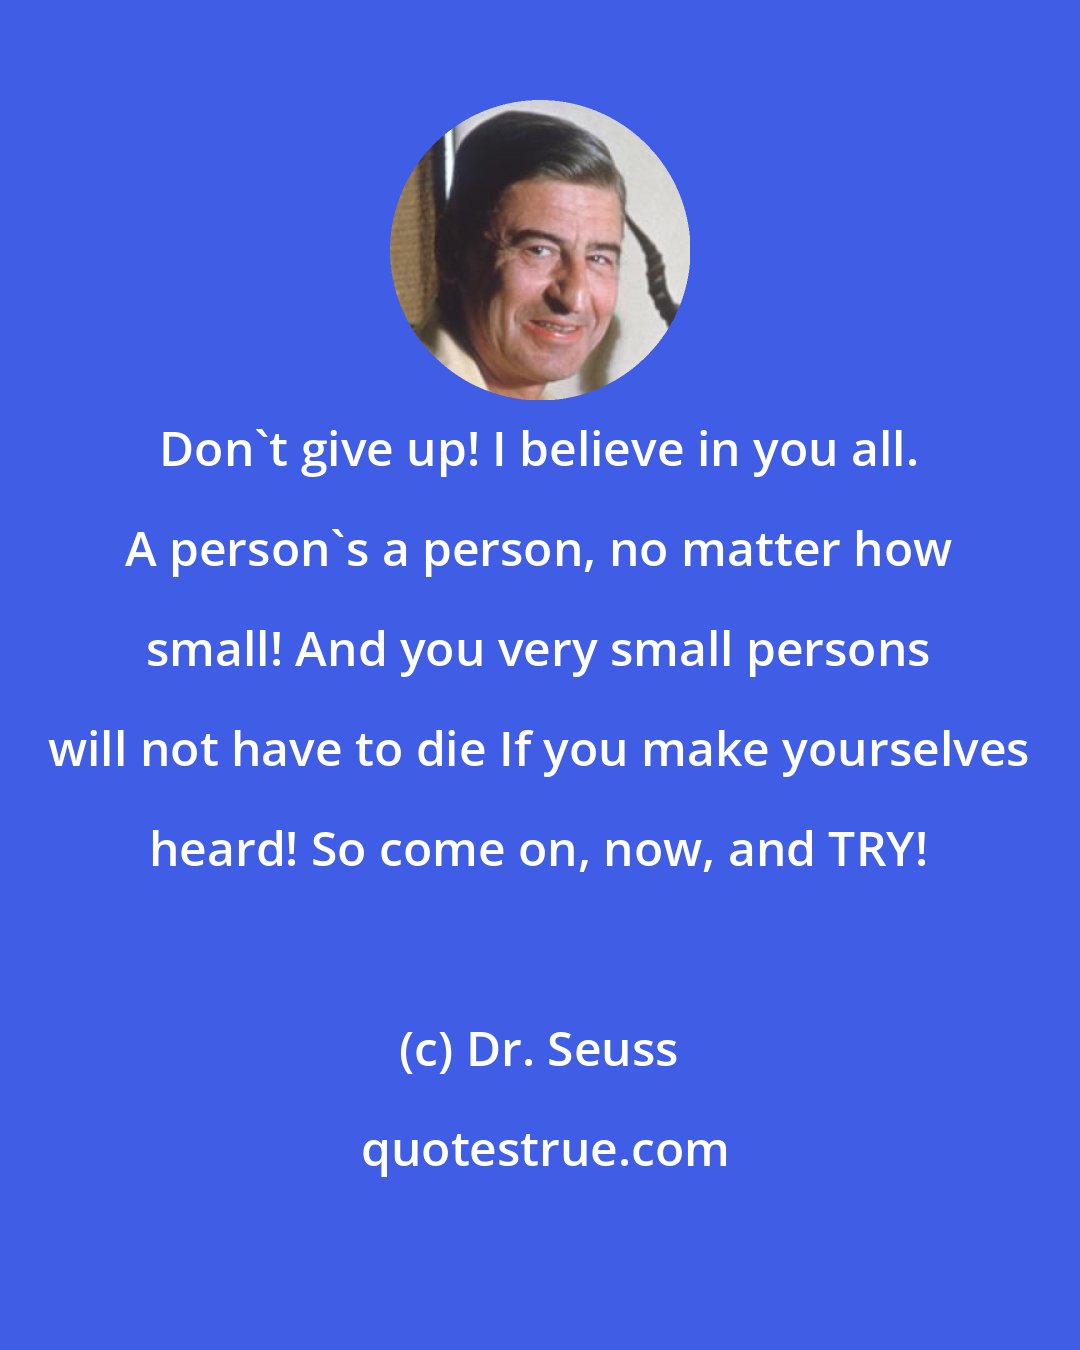 Dr. Seuss: Don't give up! I believe in you all. A person's a person, no matter how small! And you very small persons will not have to die If you make yourselves heard! So come on, now, and TRY!